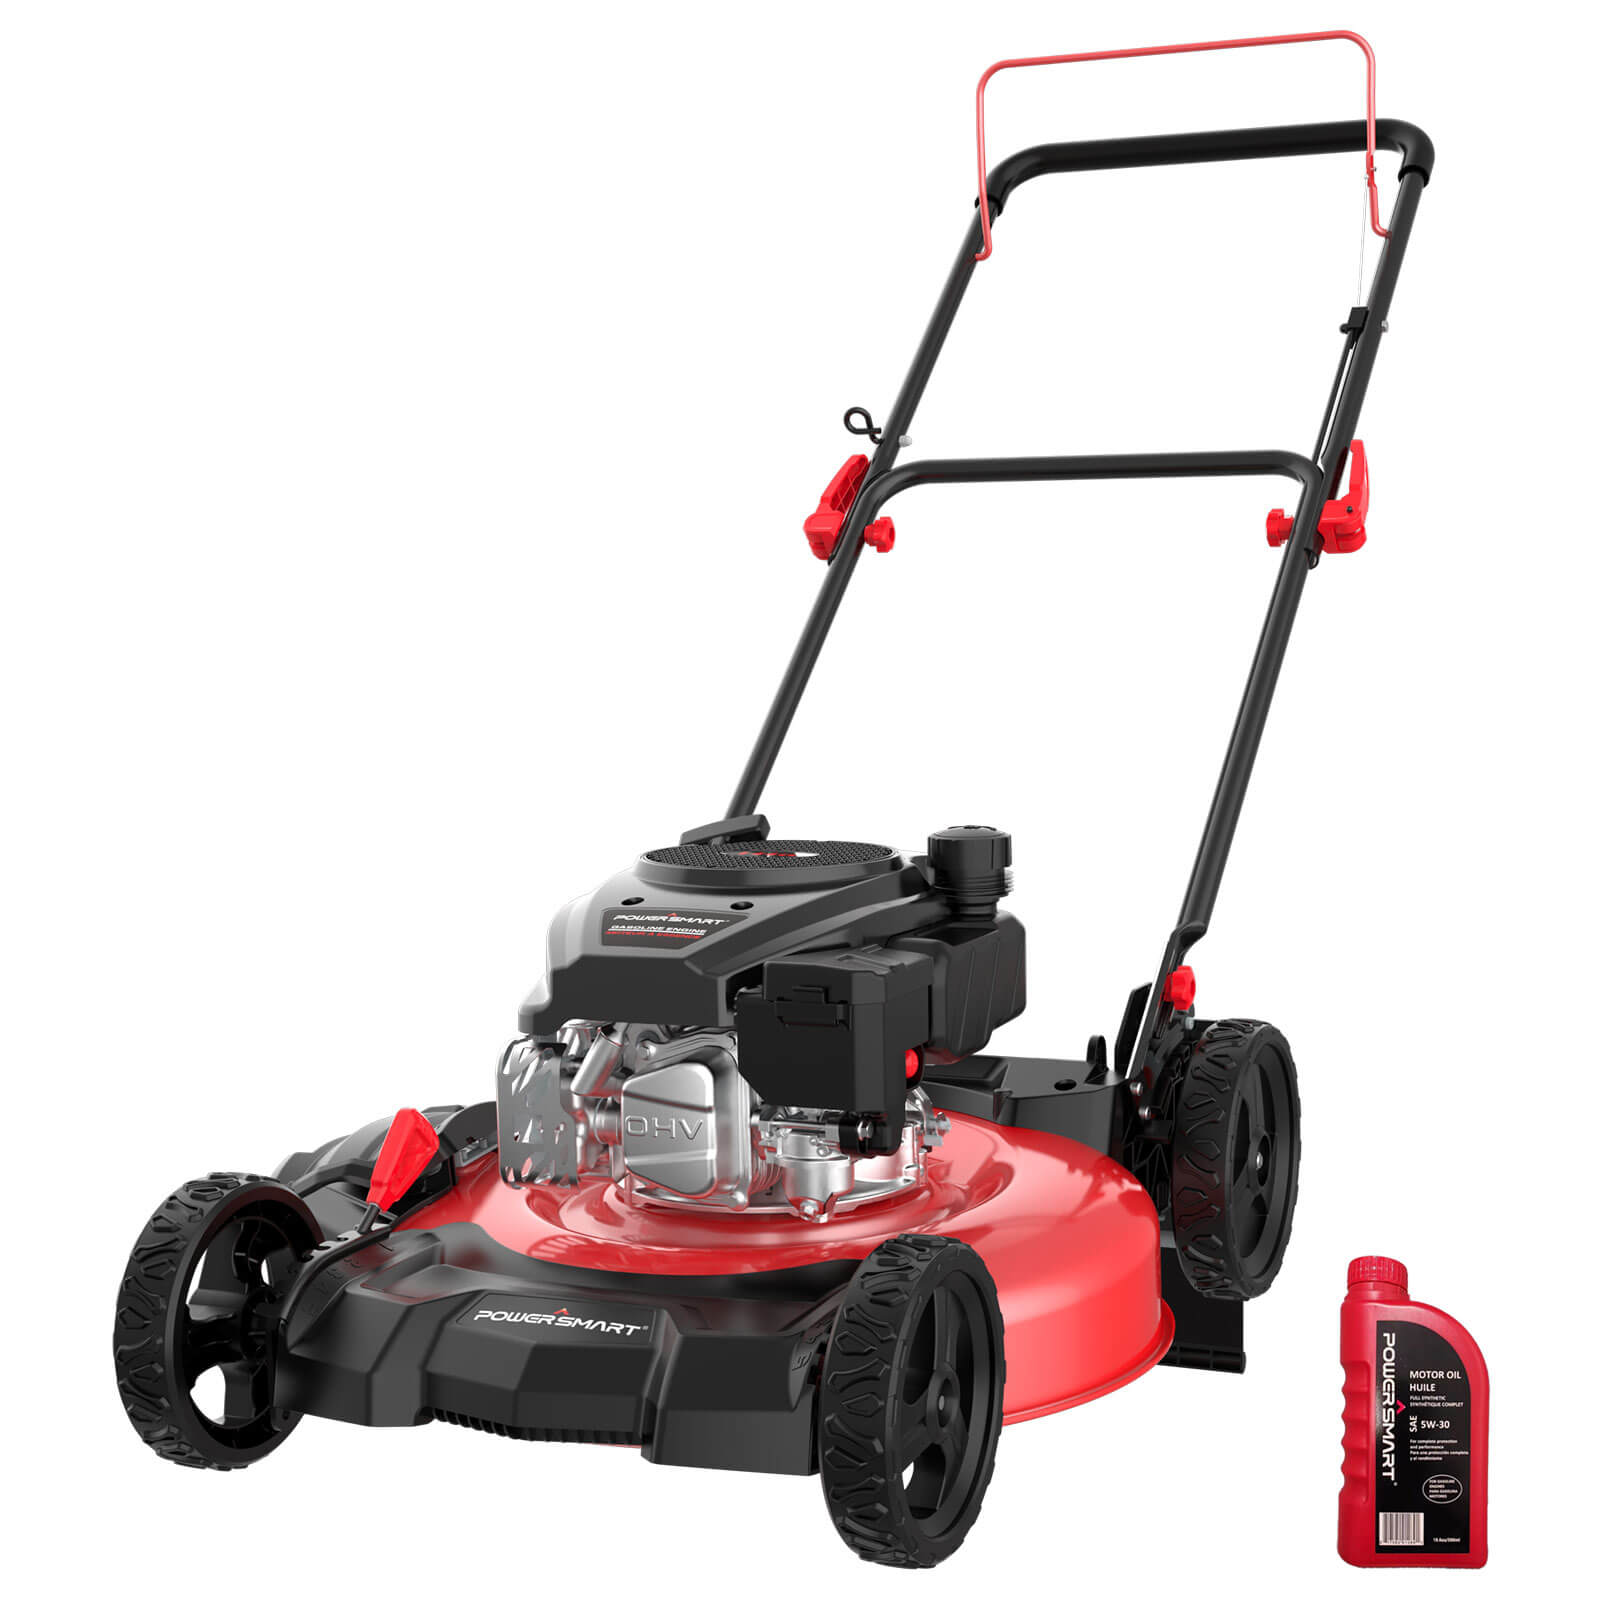 PowerSmart 21'' 144cc Gas Push Lawn Mower, 6-Position Height Adjustment, Side Discharge DB8602C